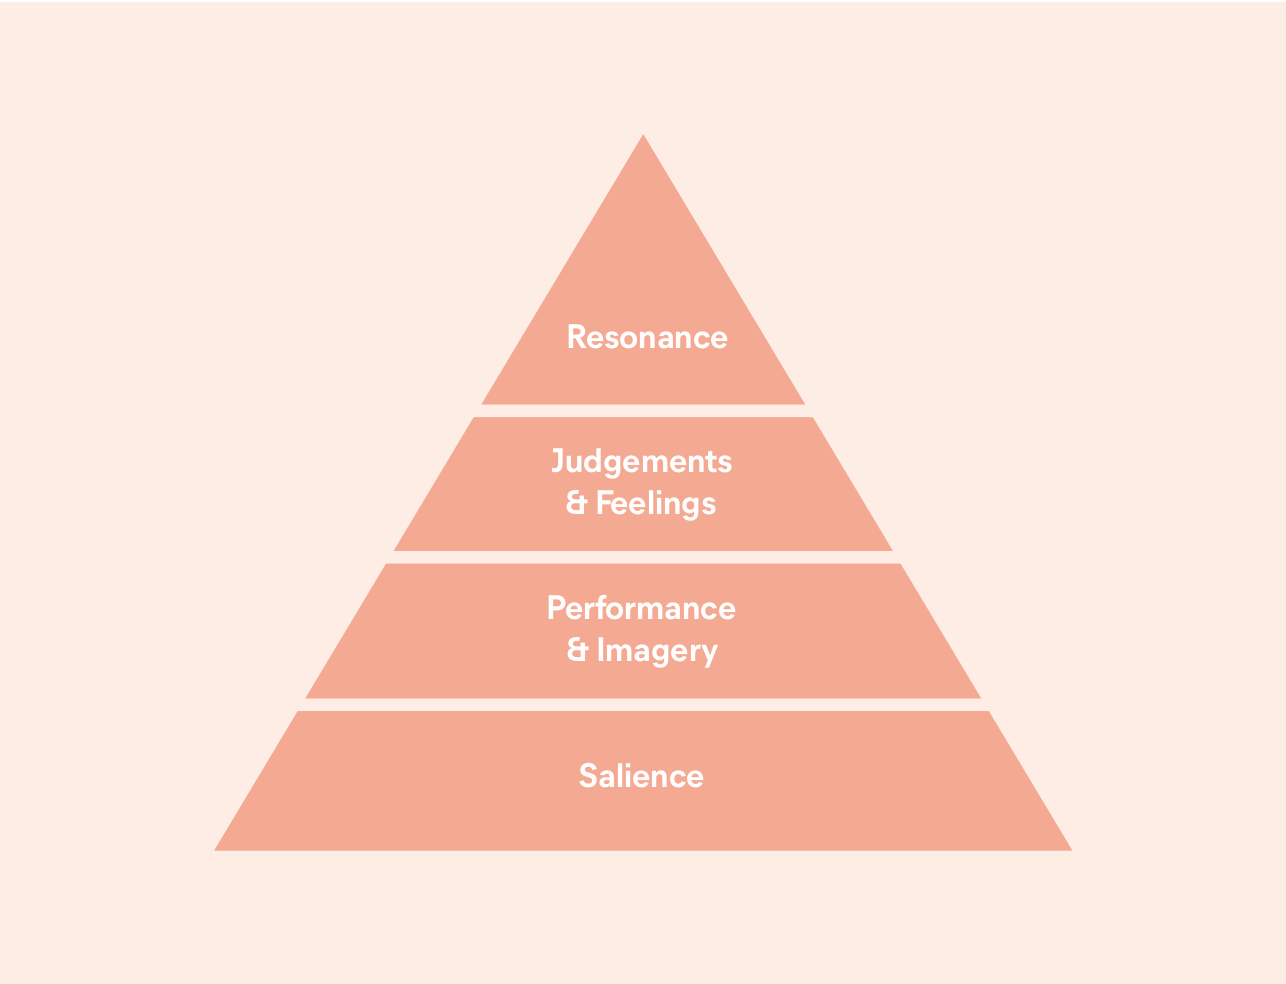 using-the-brand-equity-pyramid-to-build-brands